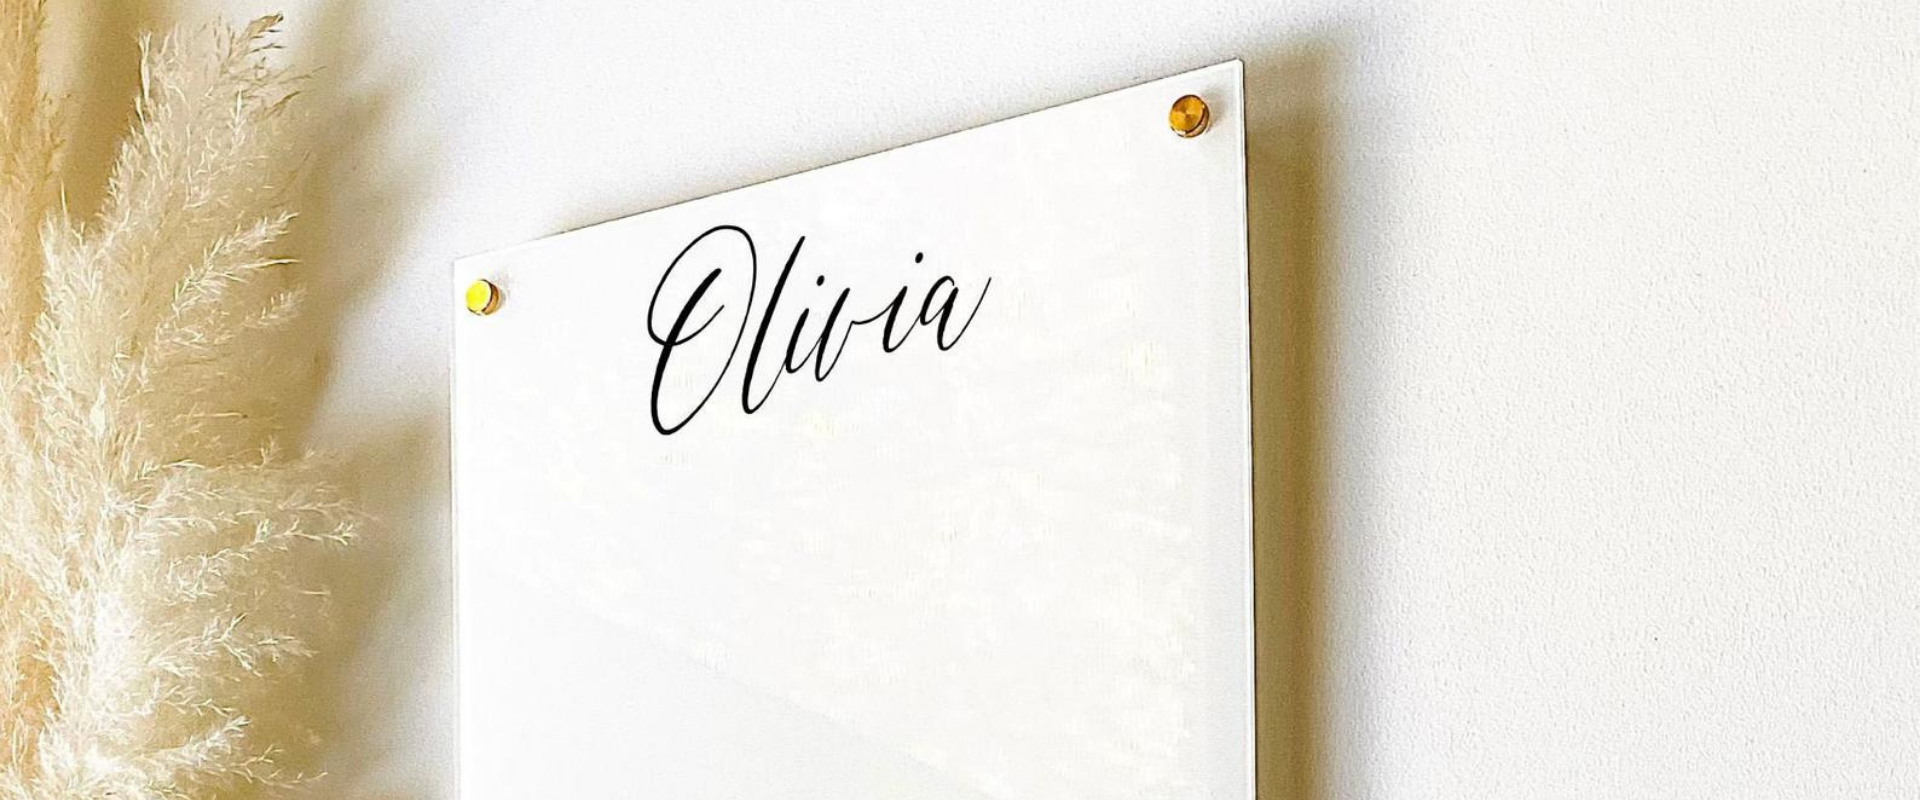 School&#8217;s a Breeze with our Personalized Dry Erase Boards